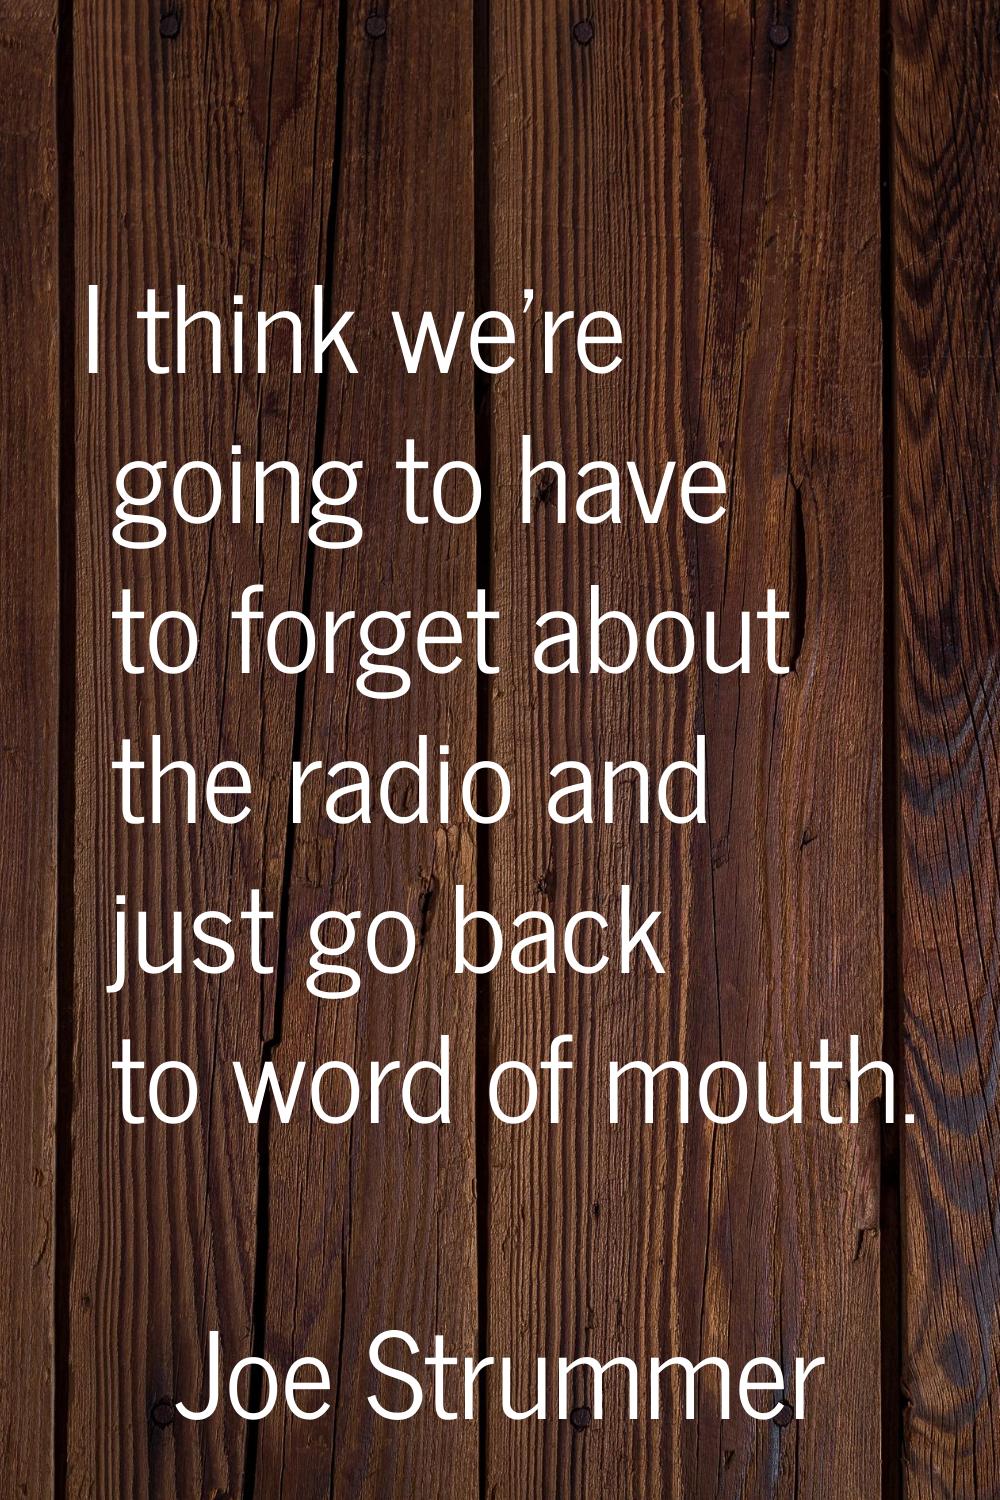 I think we're going to have to forget about the radio and just go back to word of mouth.